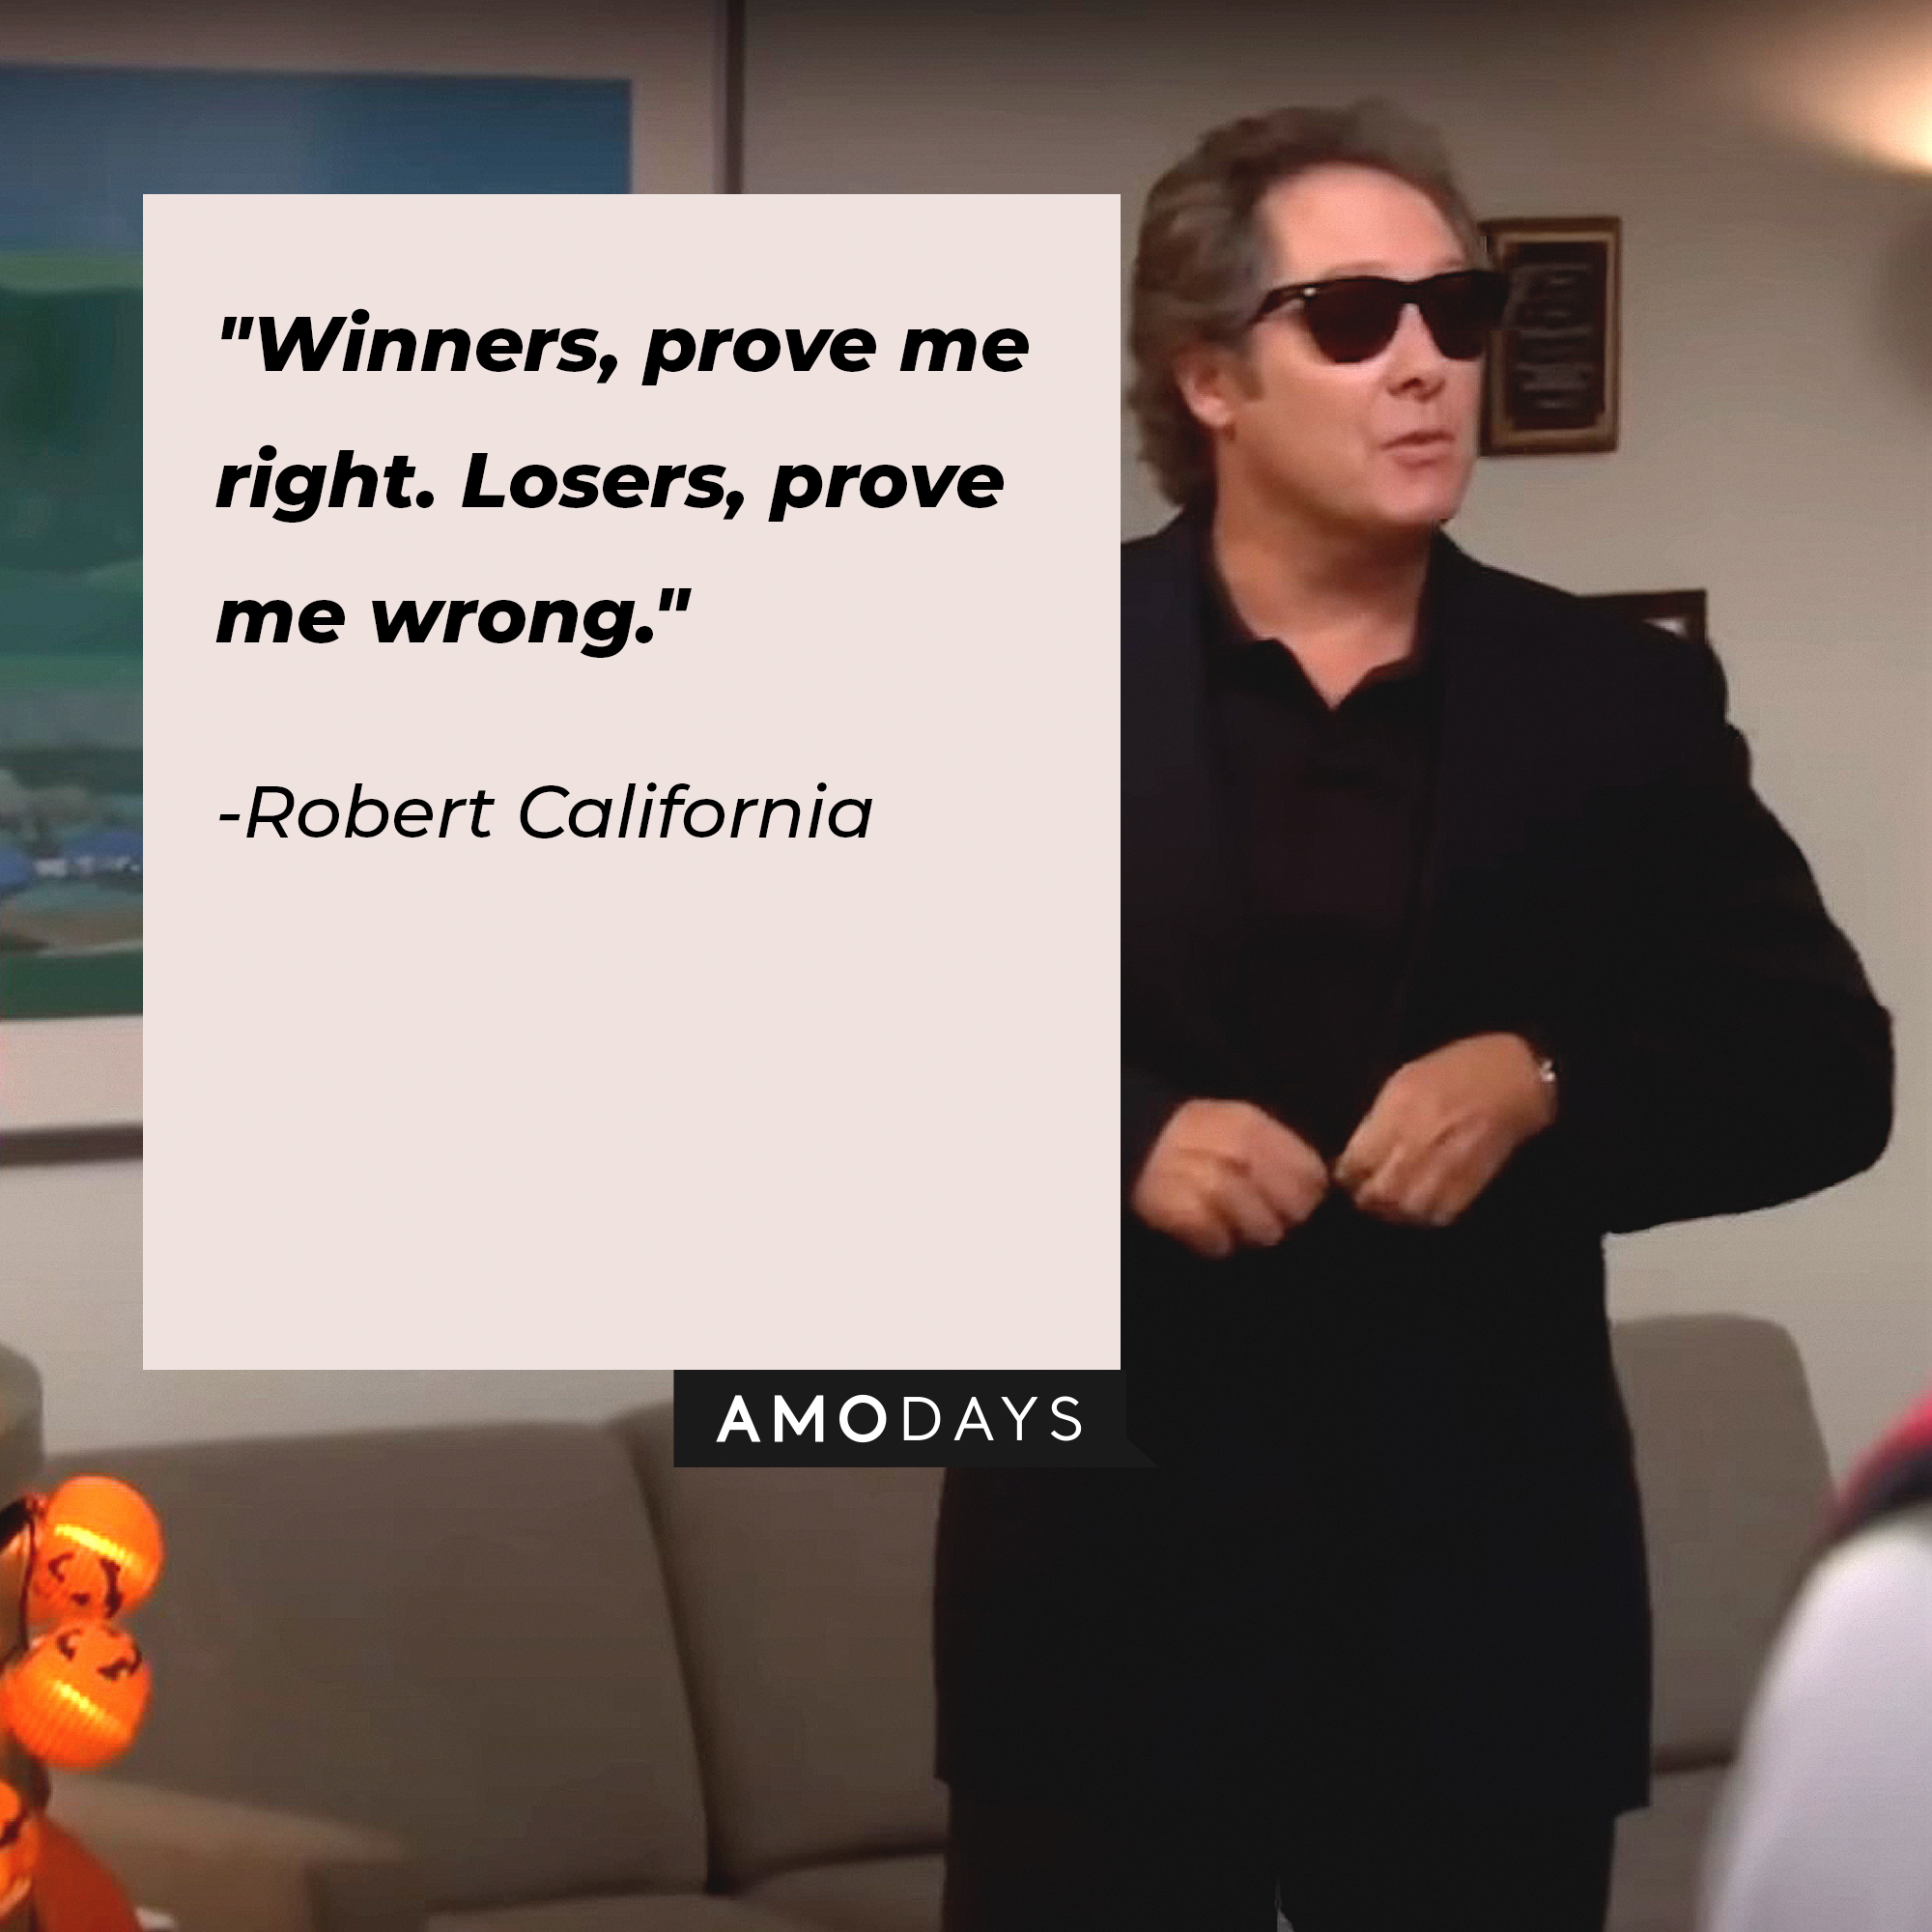 Robert California's quote: "Winners, prove me right. Losers, prove me wrong." | Image: AmoDays